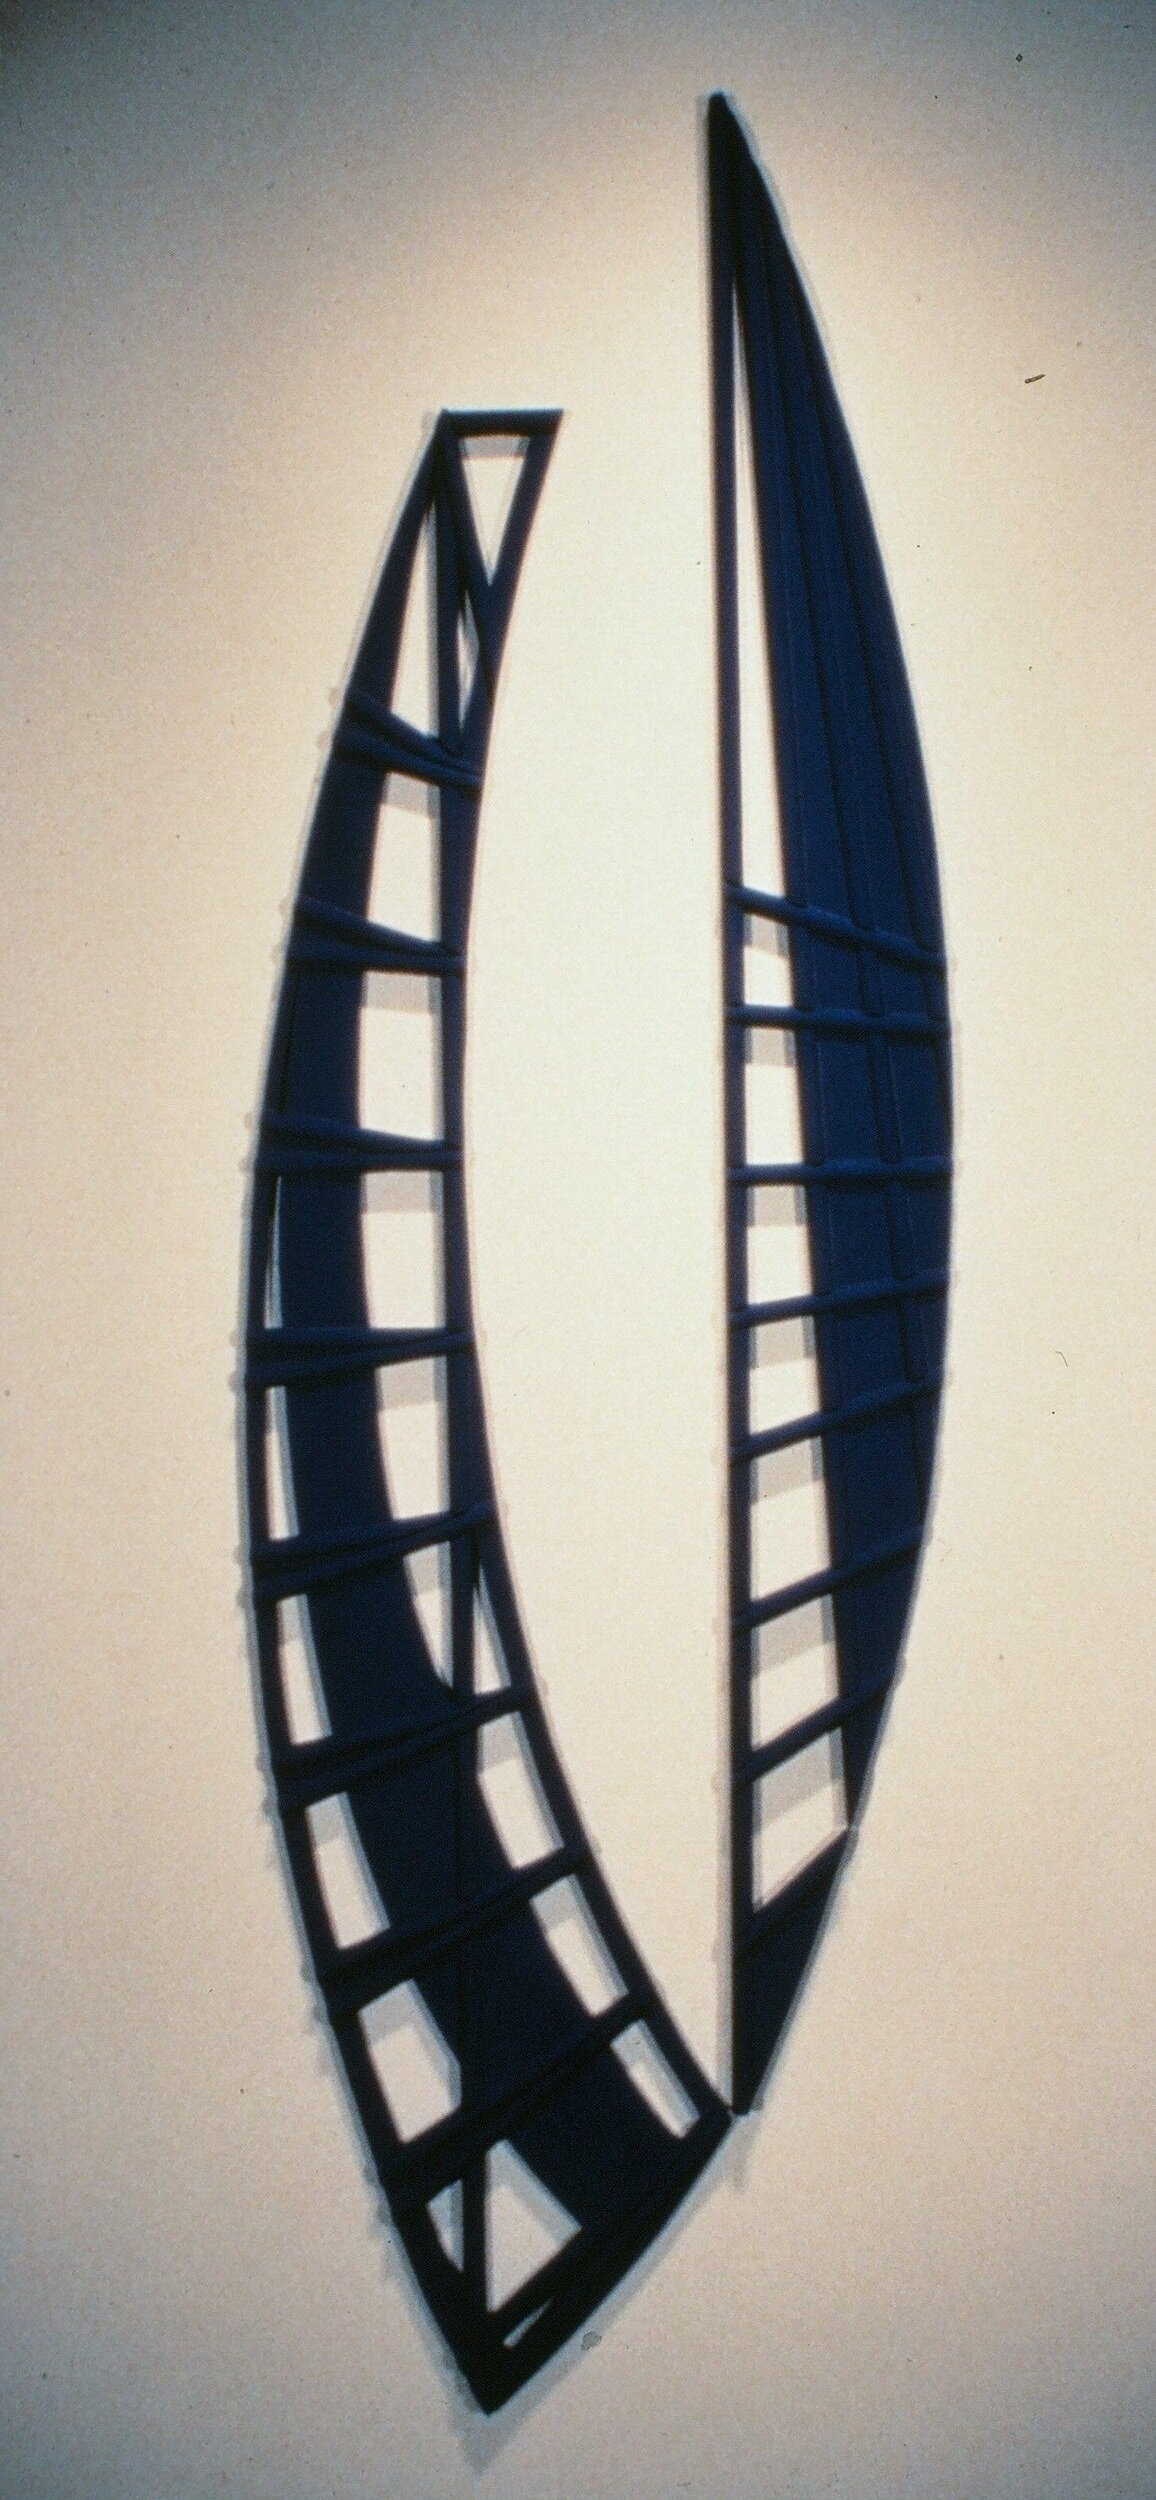  1995 The Diver’s Prang, acrylic paint + pencil on wood, 111x33 inches 